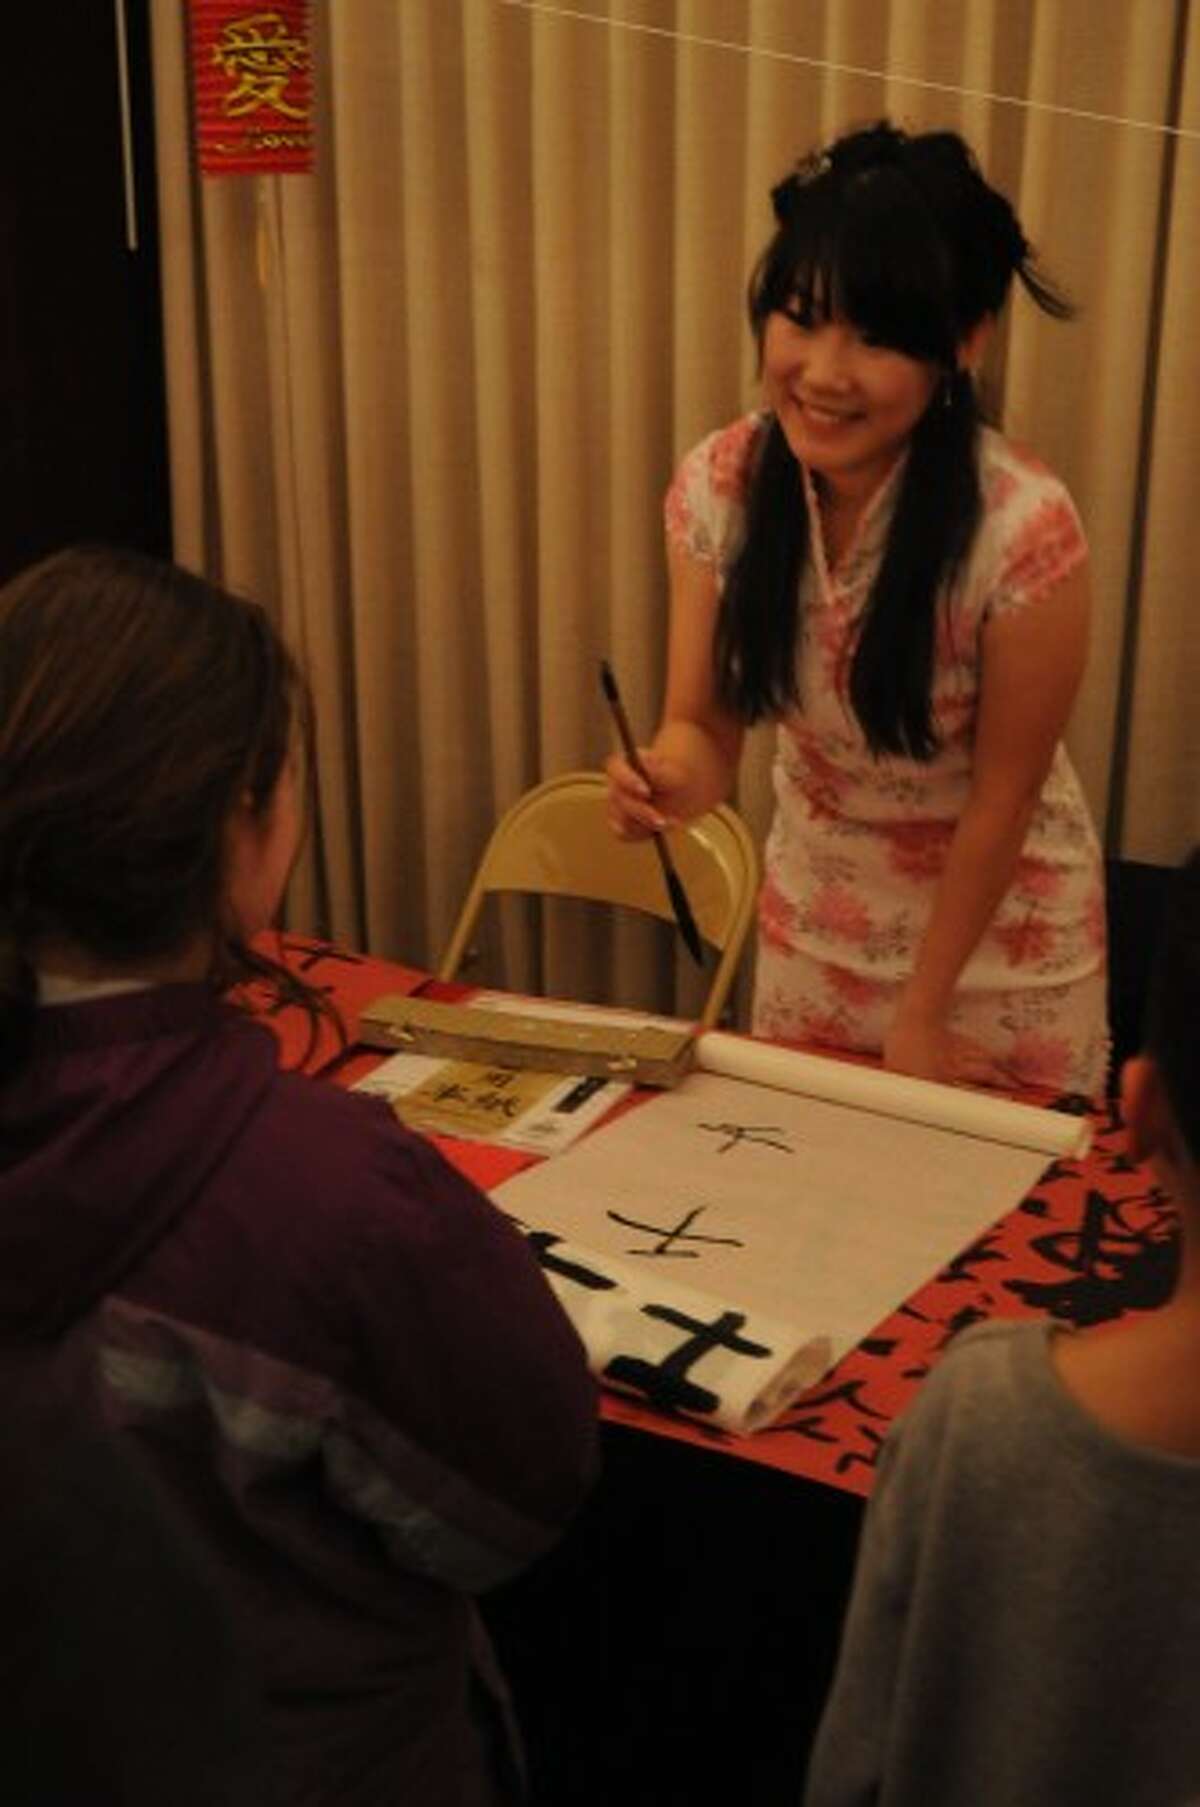 DEMONSTRATION: Chinese Cultural Student Group chair Xiao Hua works a table on Tuesday at the university’s Chinese New Year celebration. Attendees of the celebration visited the tables to learn about Chinese culture and Asian religions. Here, children practiced writing Chinese characters. (Pioneer photo/Kyle Leppek)